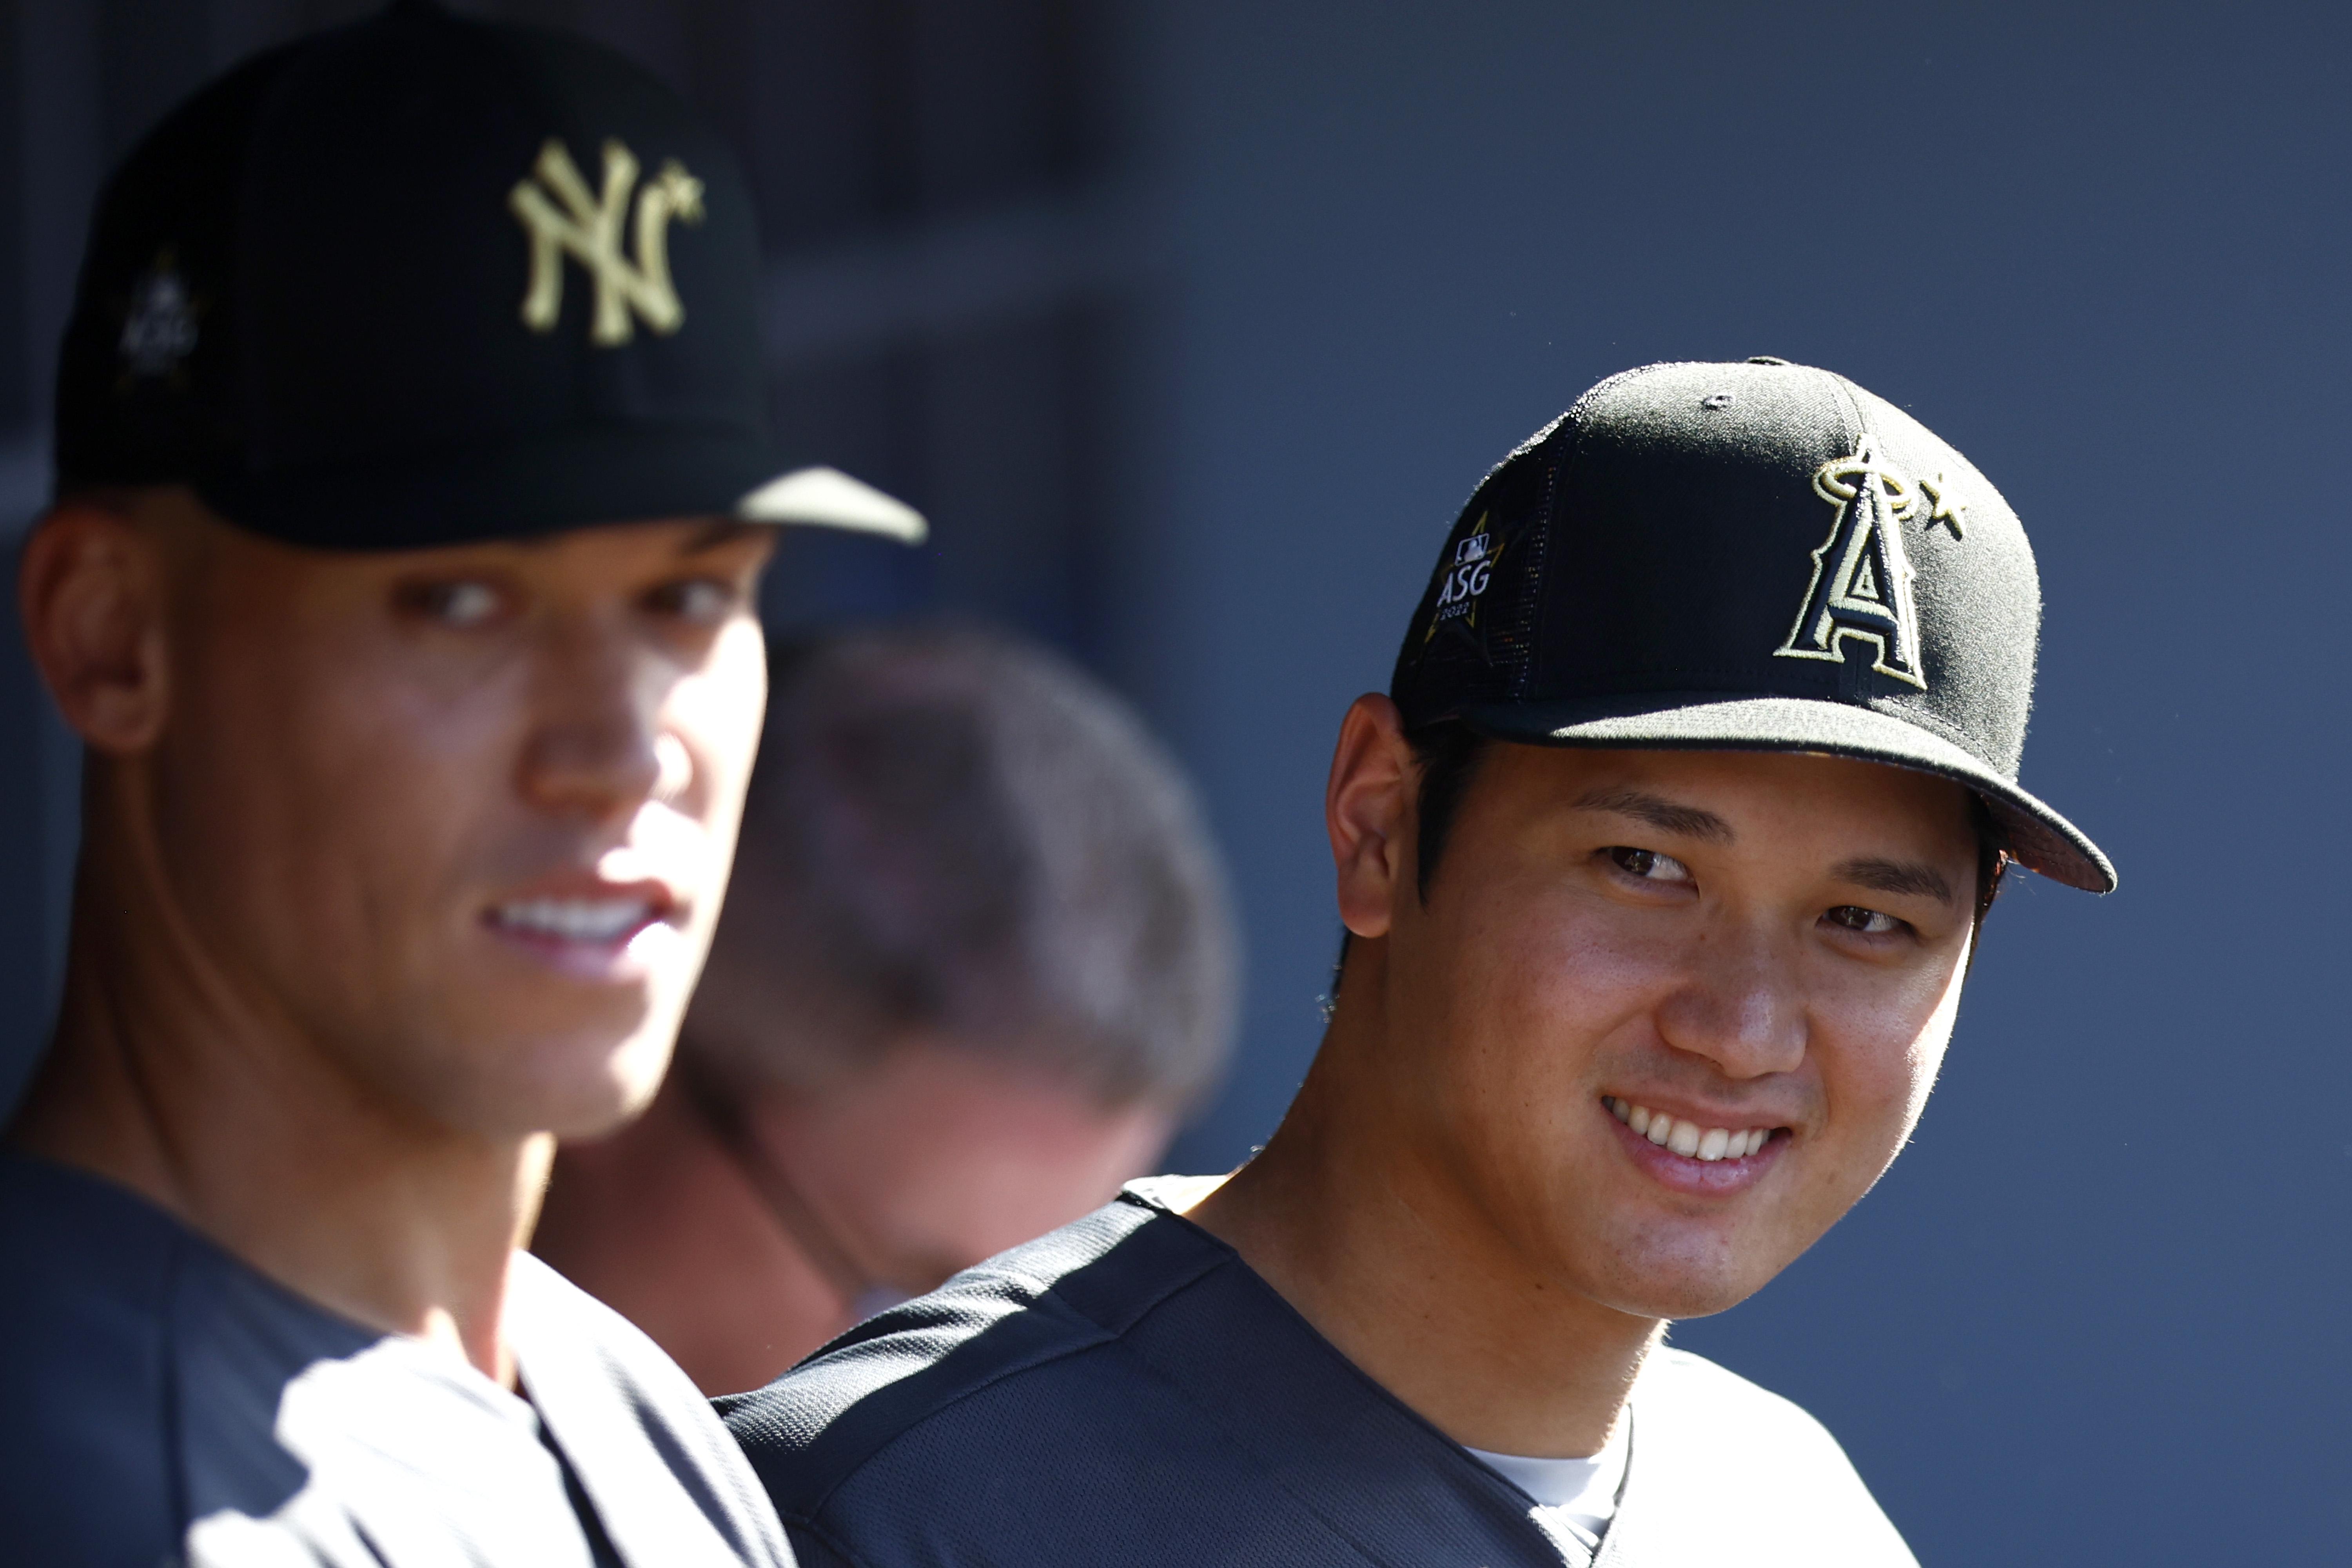 Aaron Judge and Shohei Ohtani at the All-Star Game.